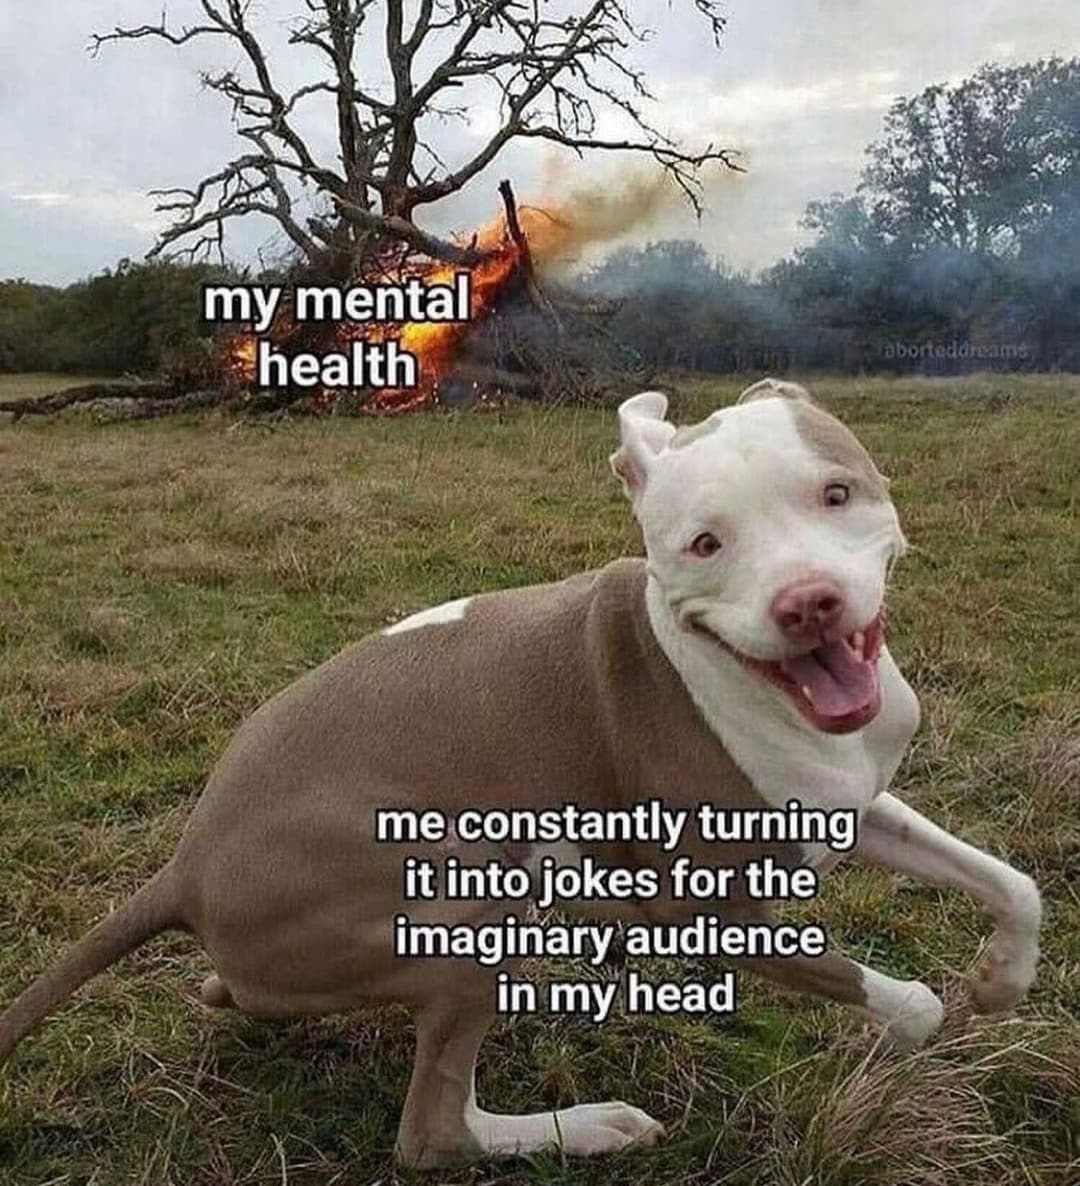 monday morning randomness - mental health memes funny - my mental health aborted dreams me constantly turning it into jokes for the imaginary audience in my head